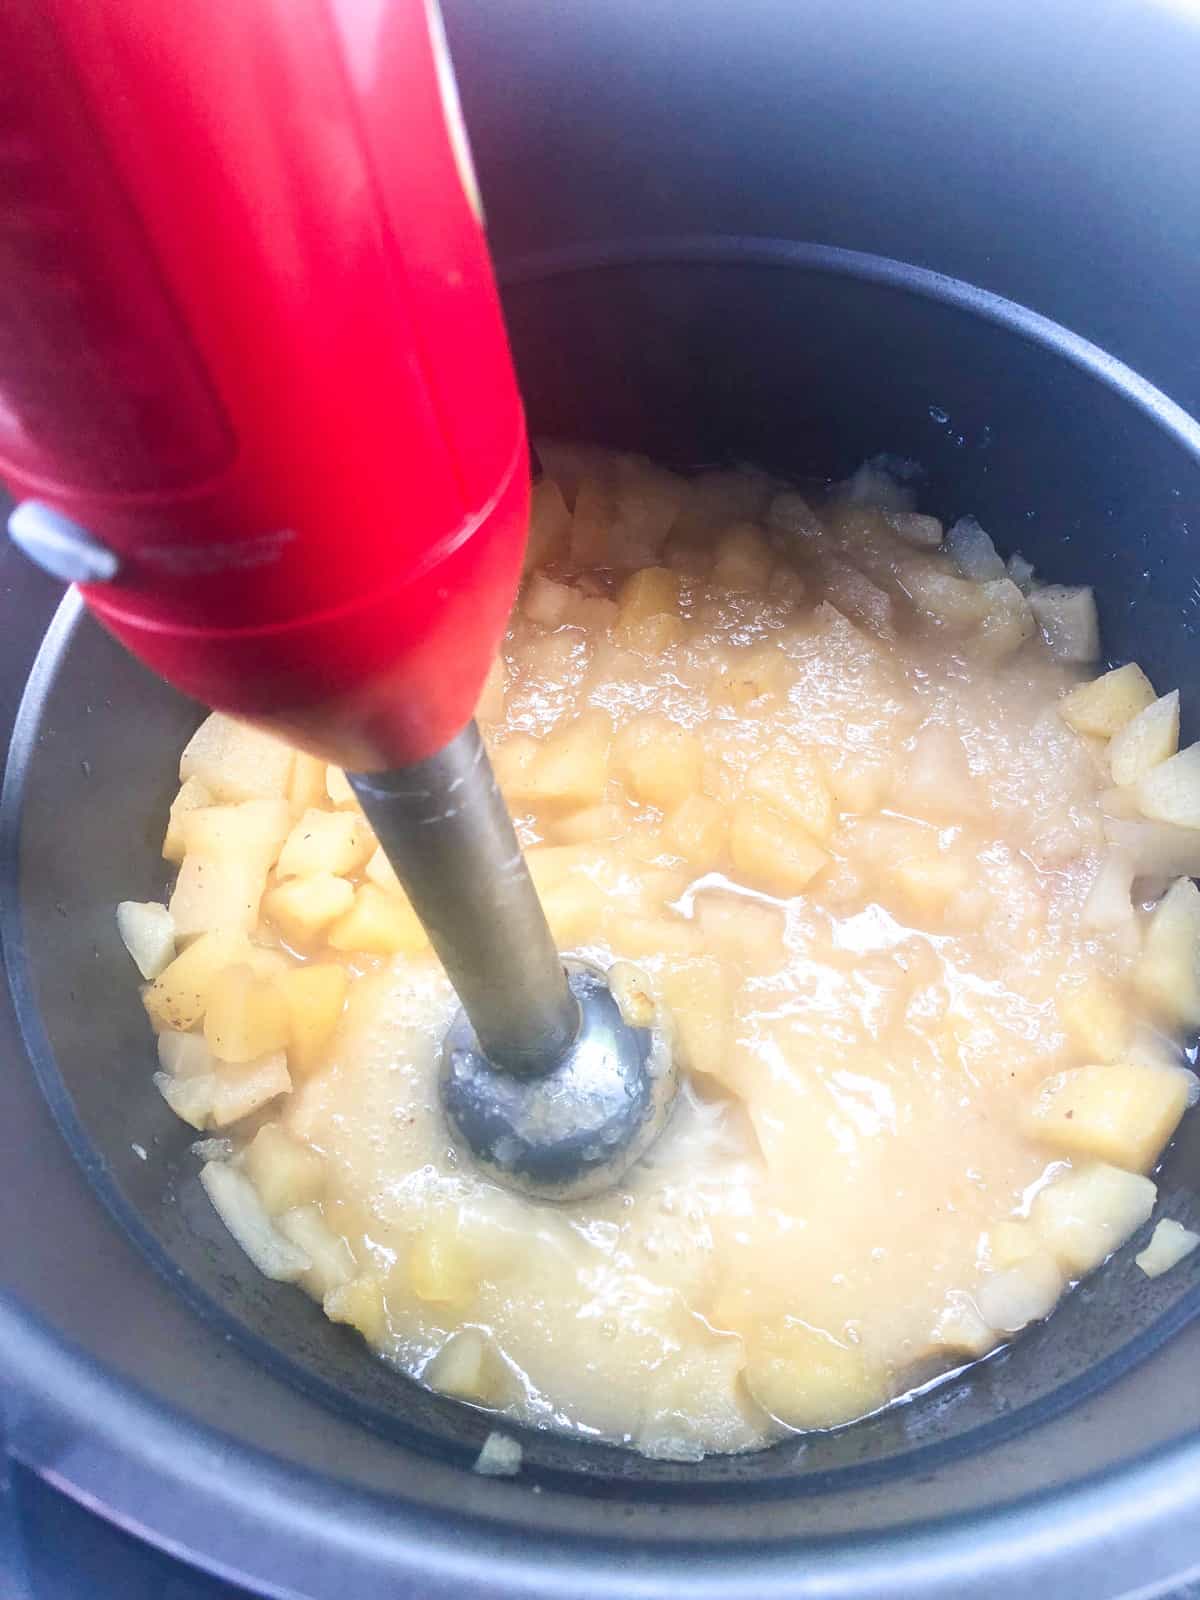 Using an immersion blender, whip the mixture to a smooth consistency. Allow to cool before serving.